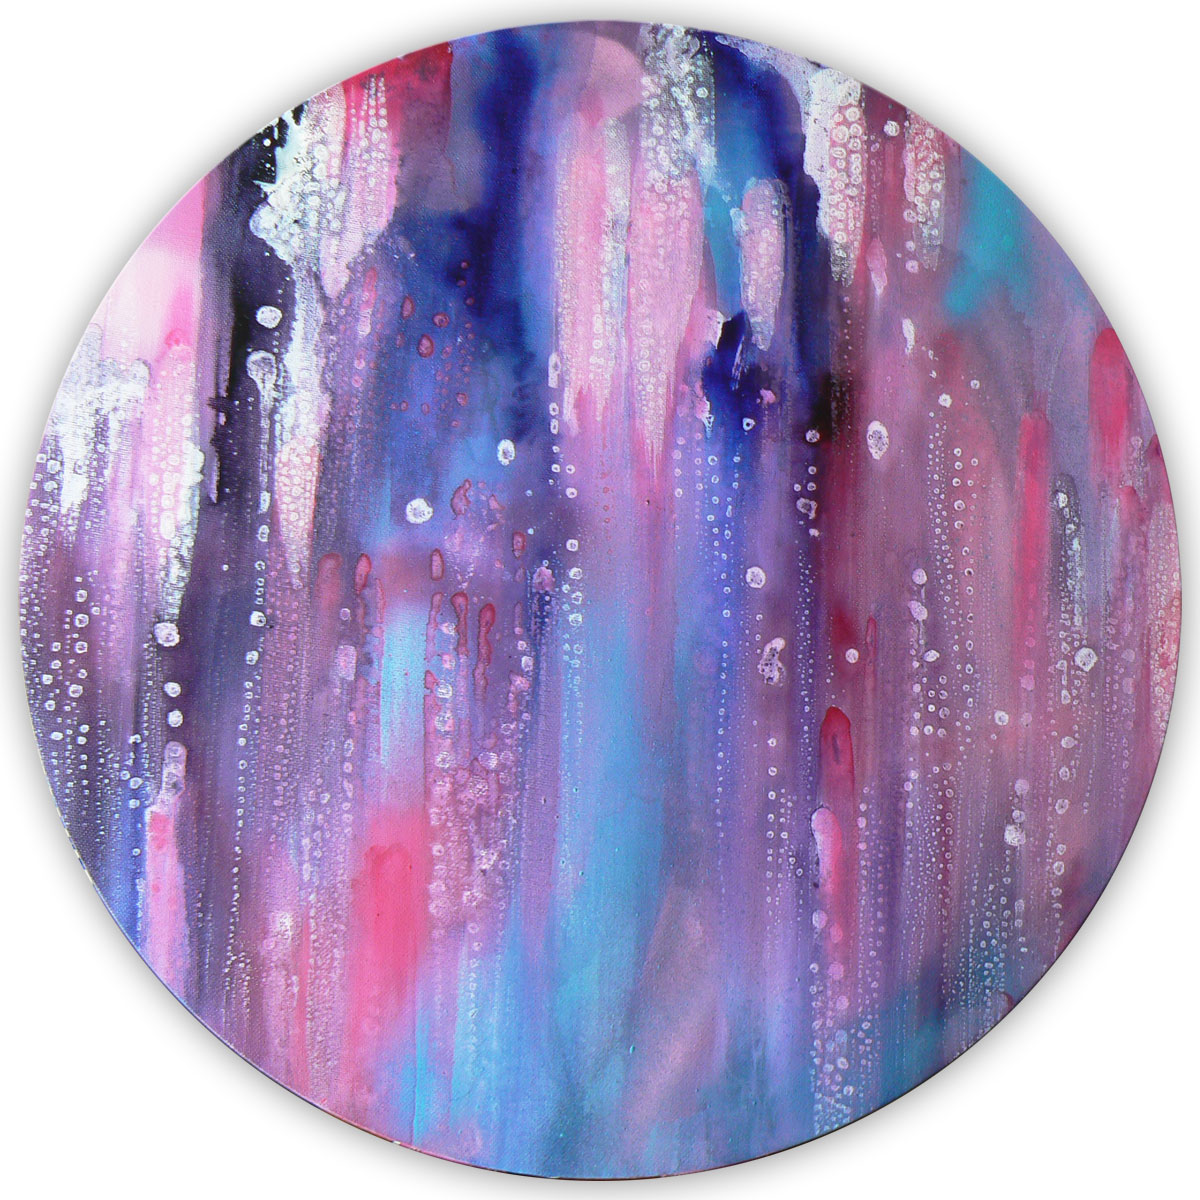 Celestial, 2015 Acrylic painting by Carolynne Coulson